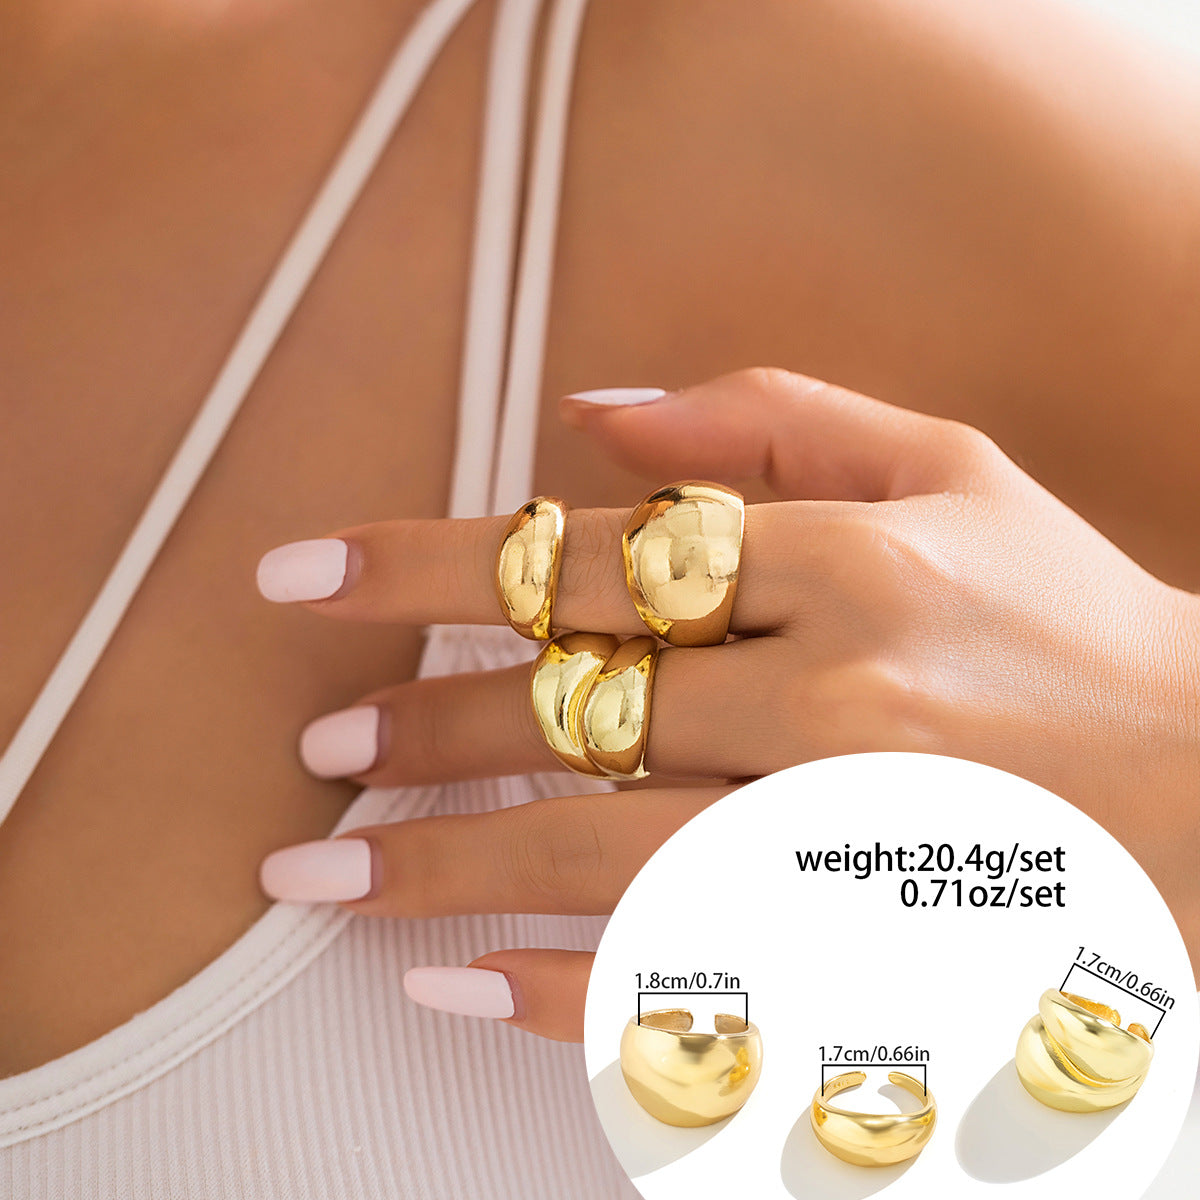 European and American Jewelry Collection: Glamorous Glossy Ball Ring Set with Open Round Design, Unique Geometric Curved Hand Accessory